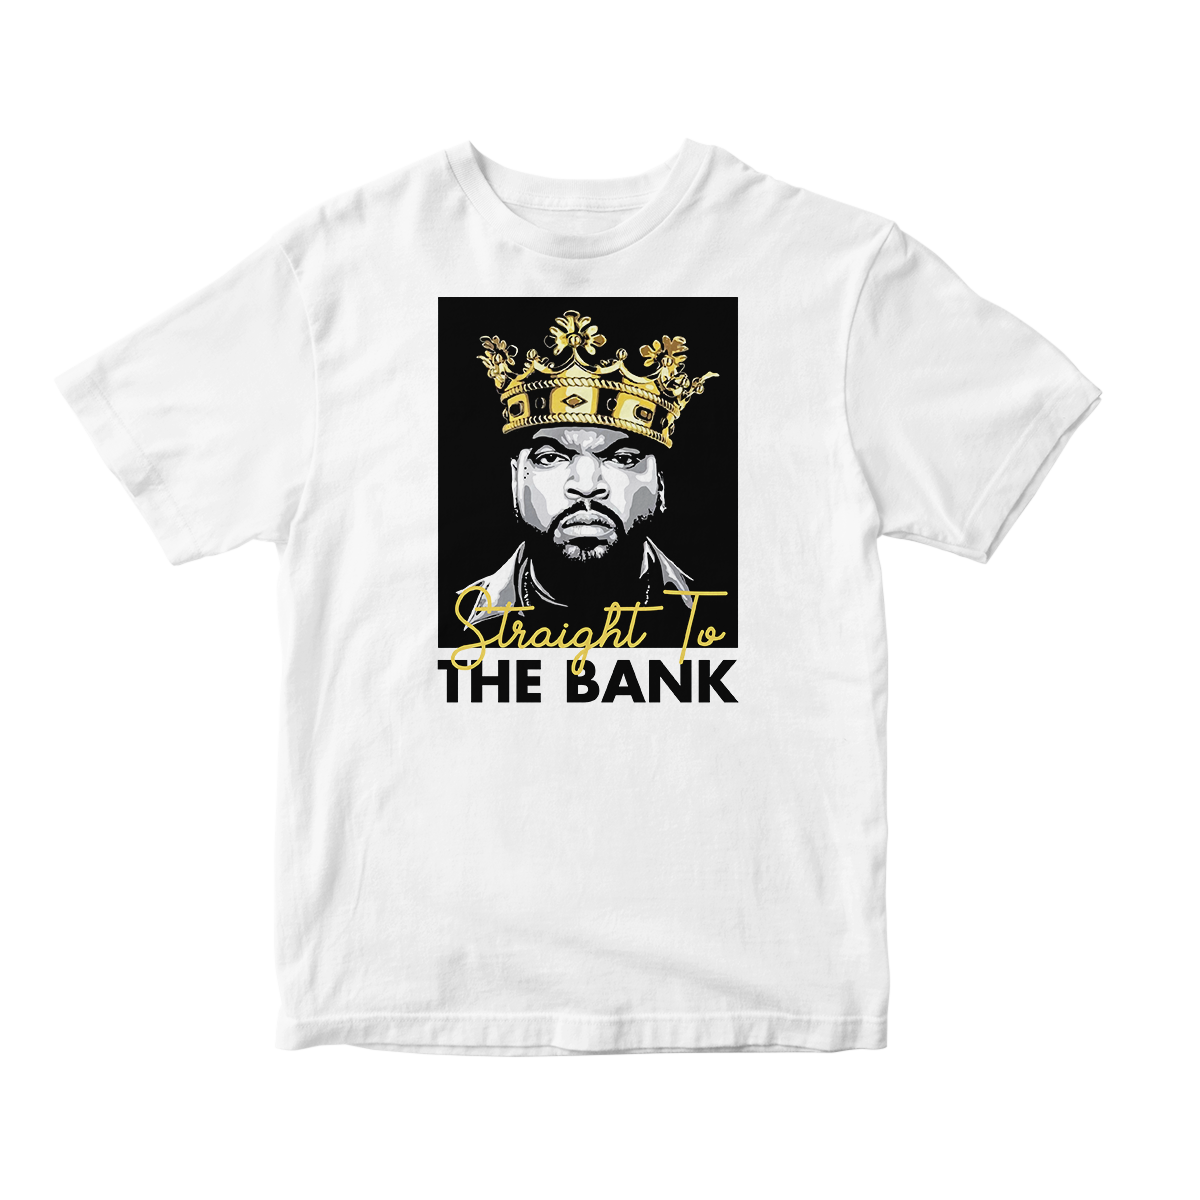 'Straight To The Bank' Short Sleeve Tee